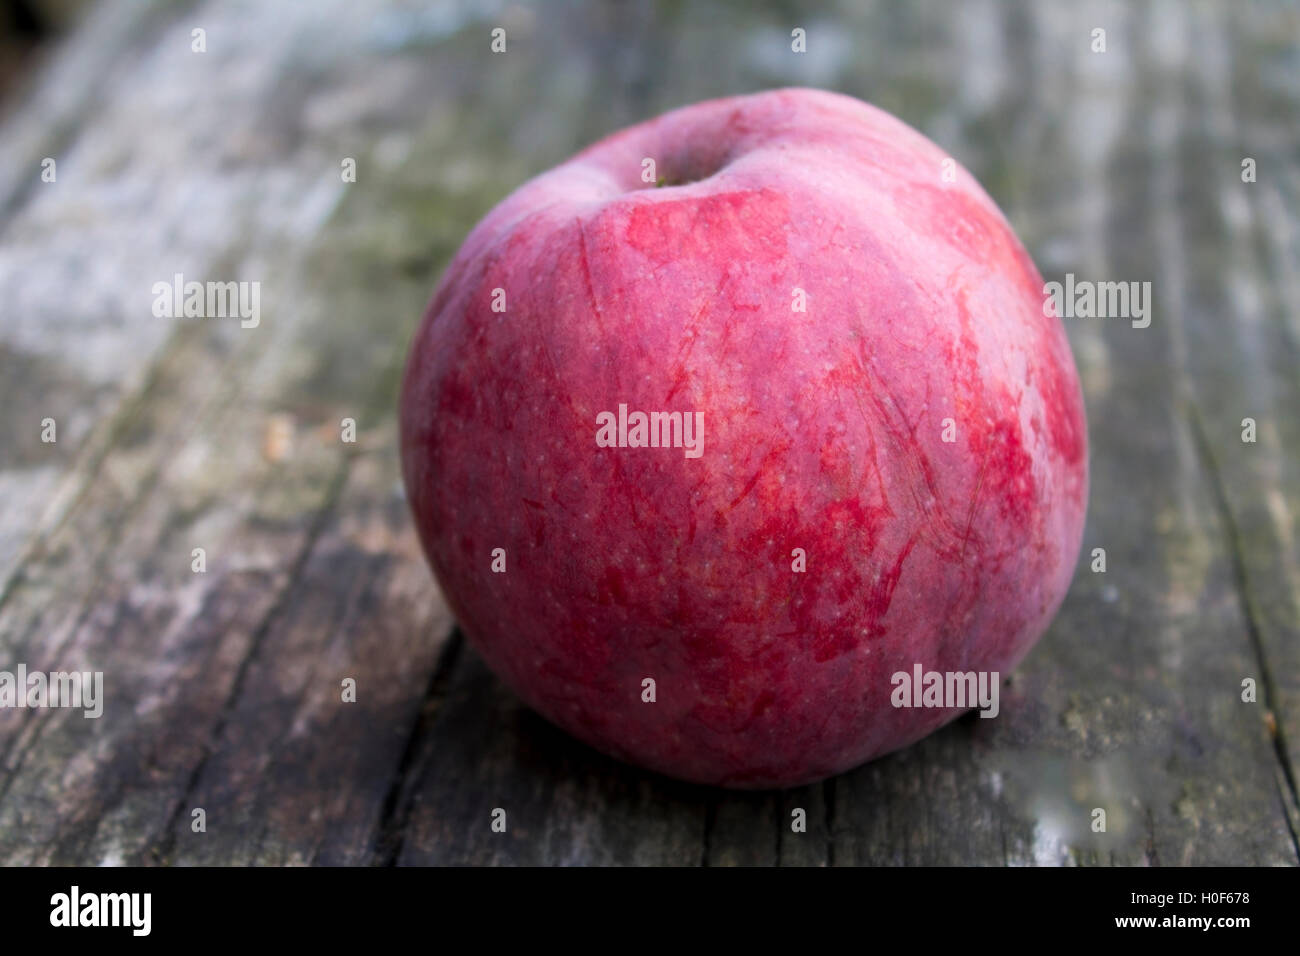 Red apple on wooden table, closeup Stock Photo